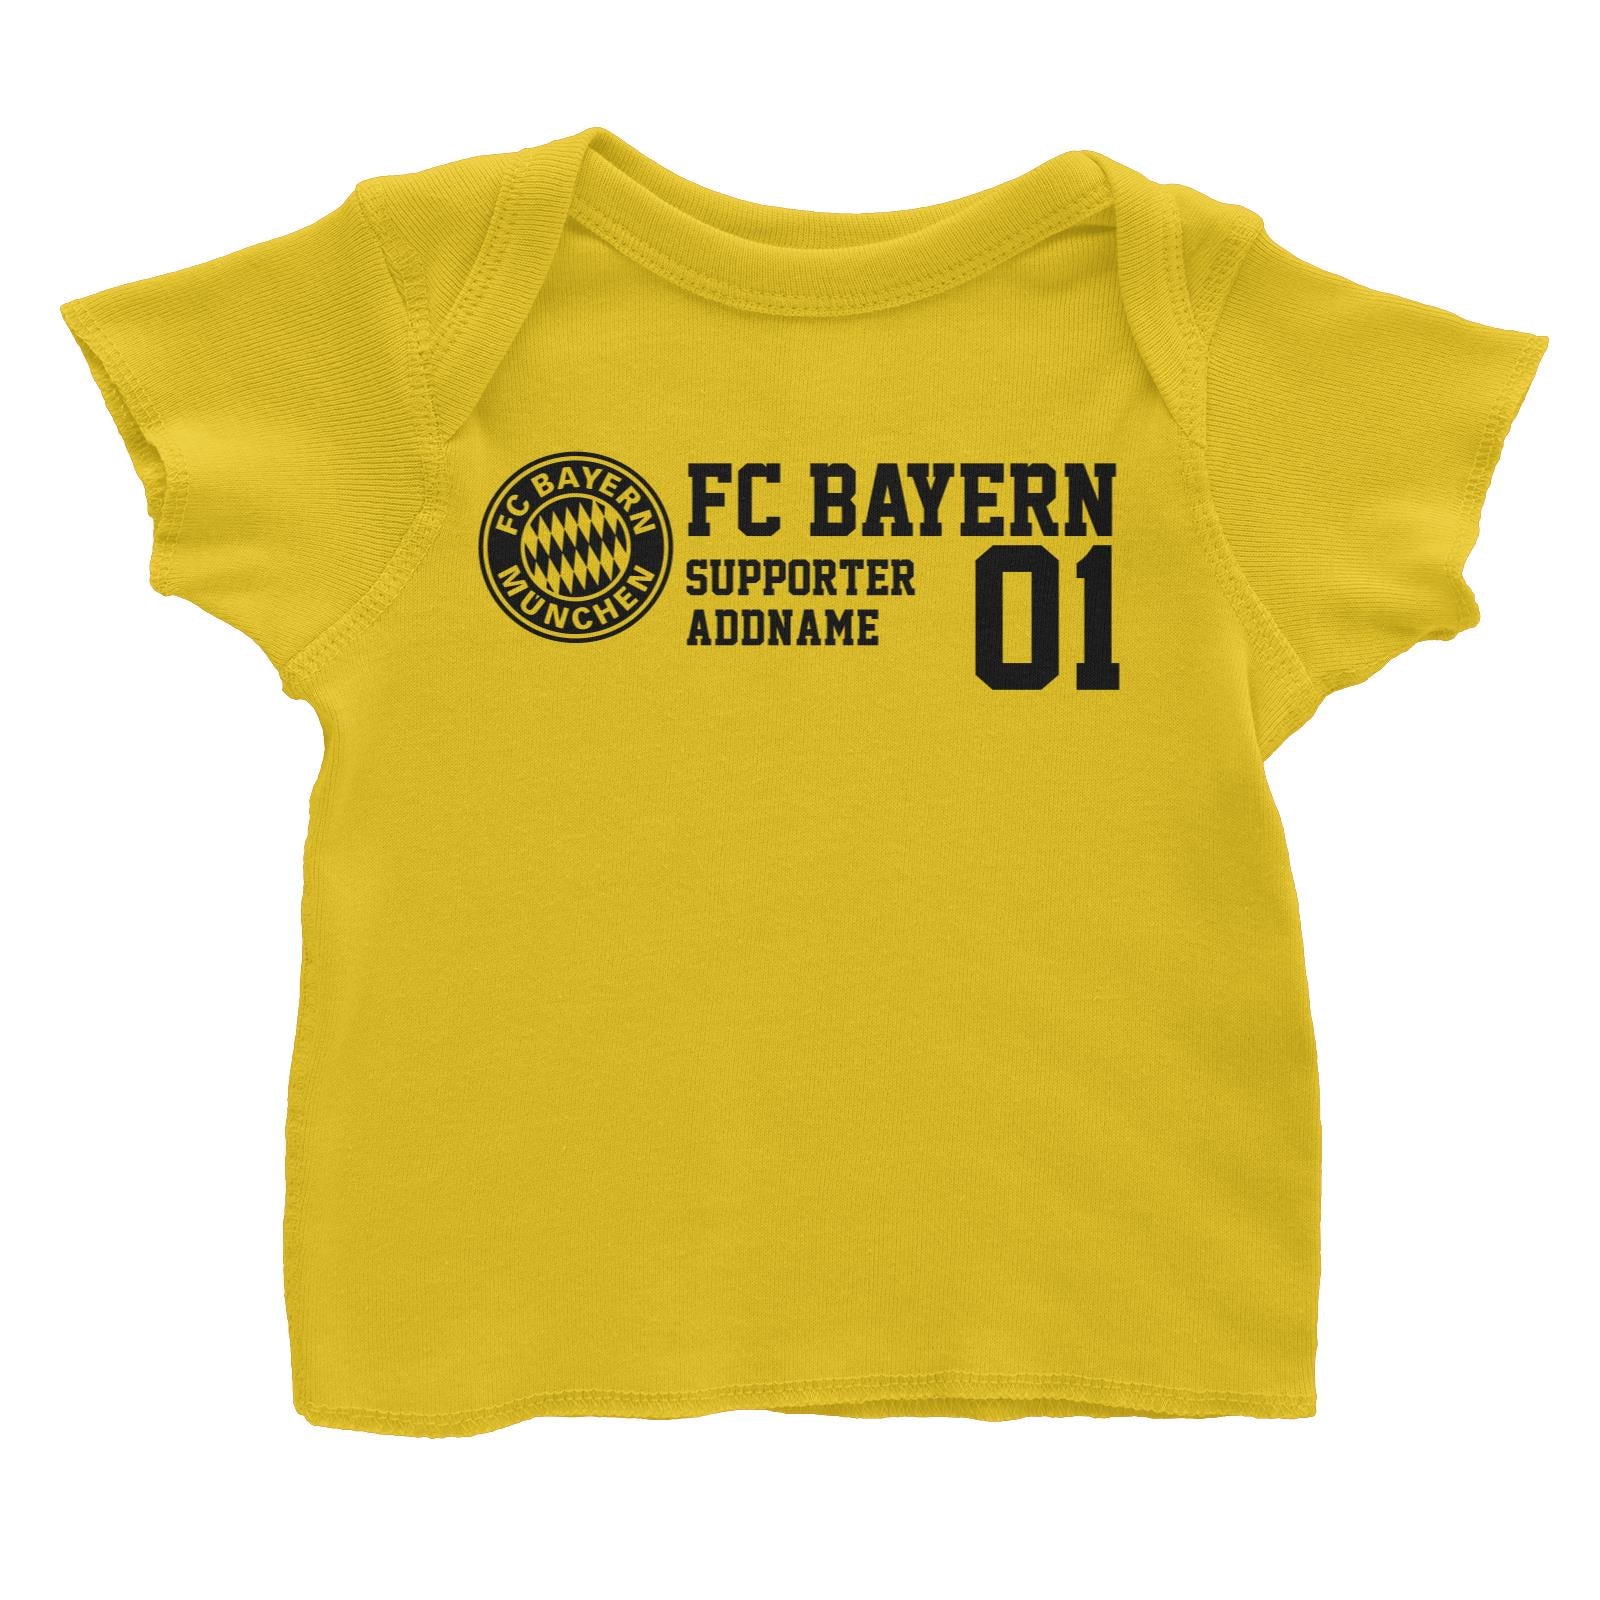 FC Bayern Football Supporter Addname Baby T-Shirt